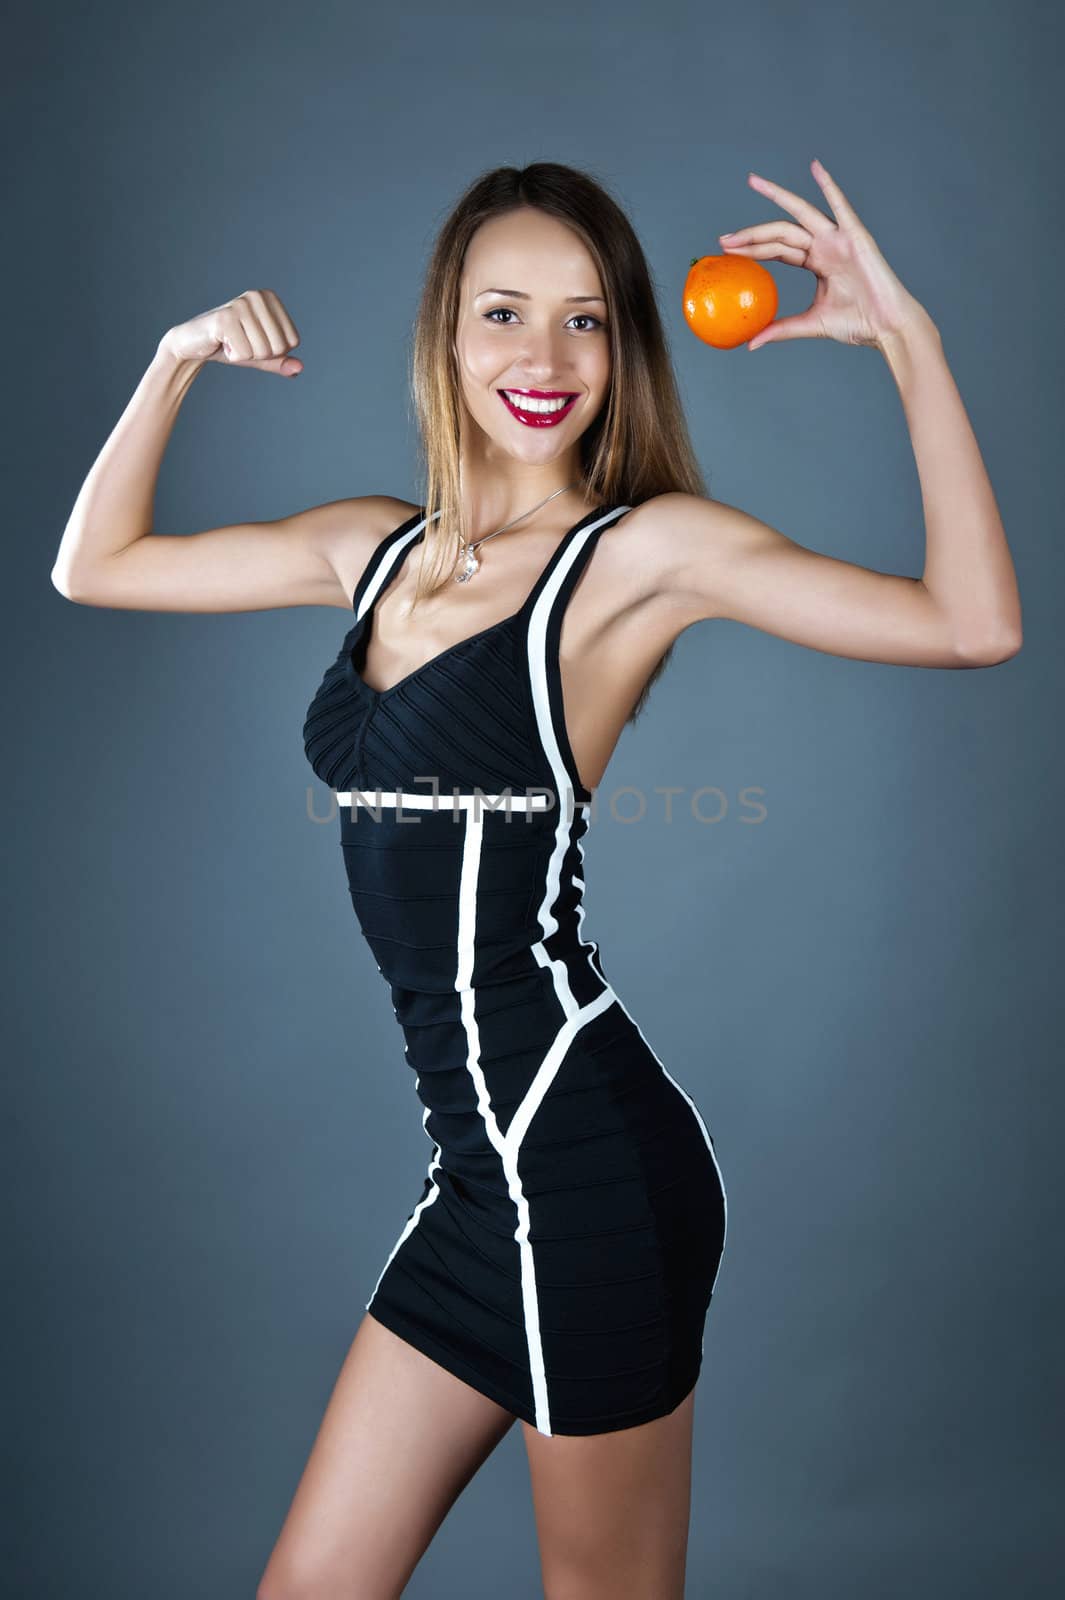 Beautiful model in a fitting dress with an orange in a hand